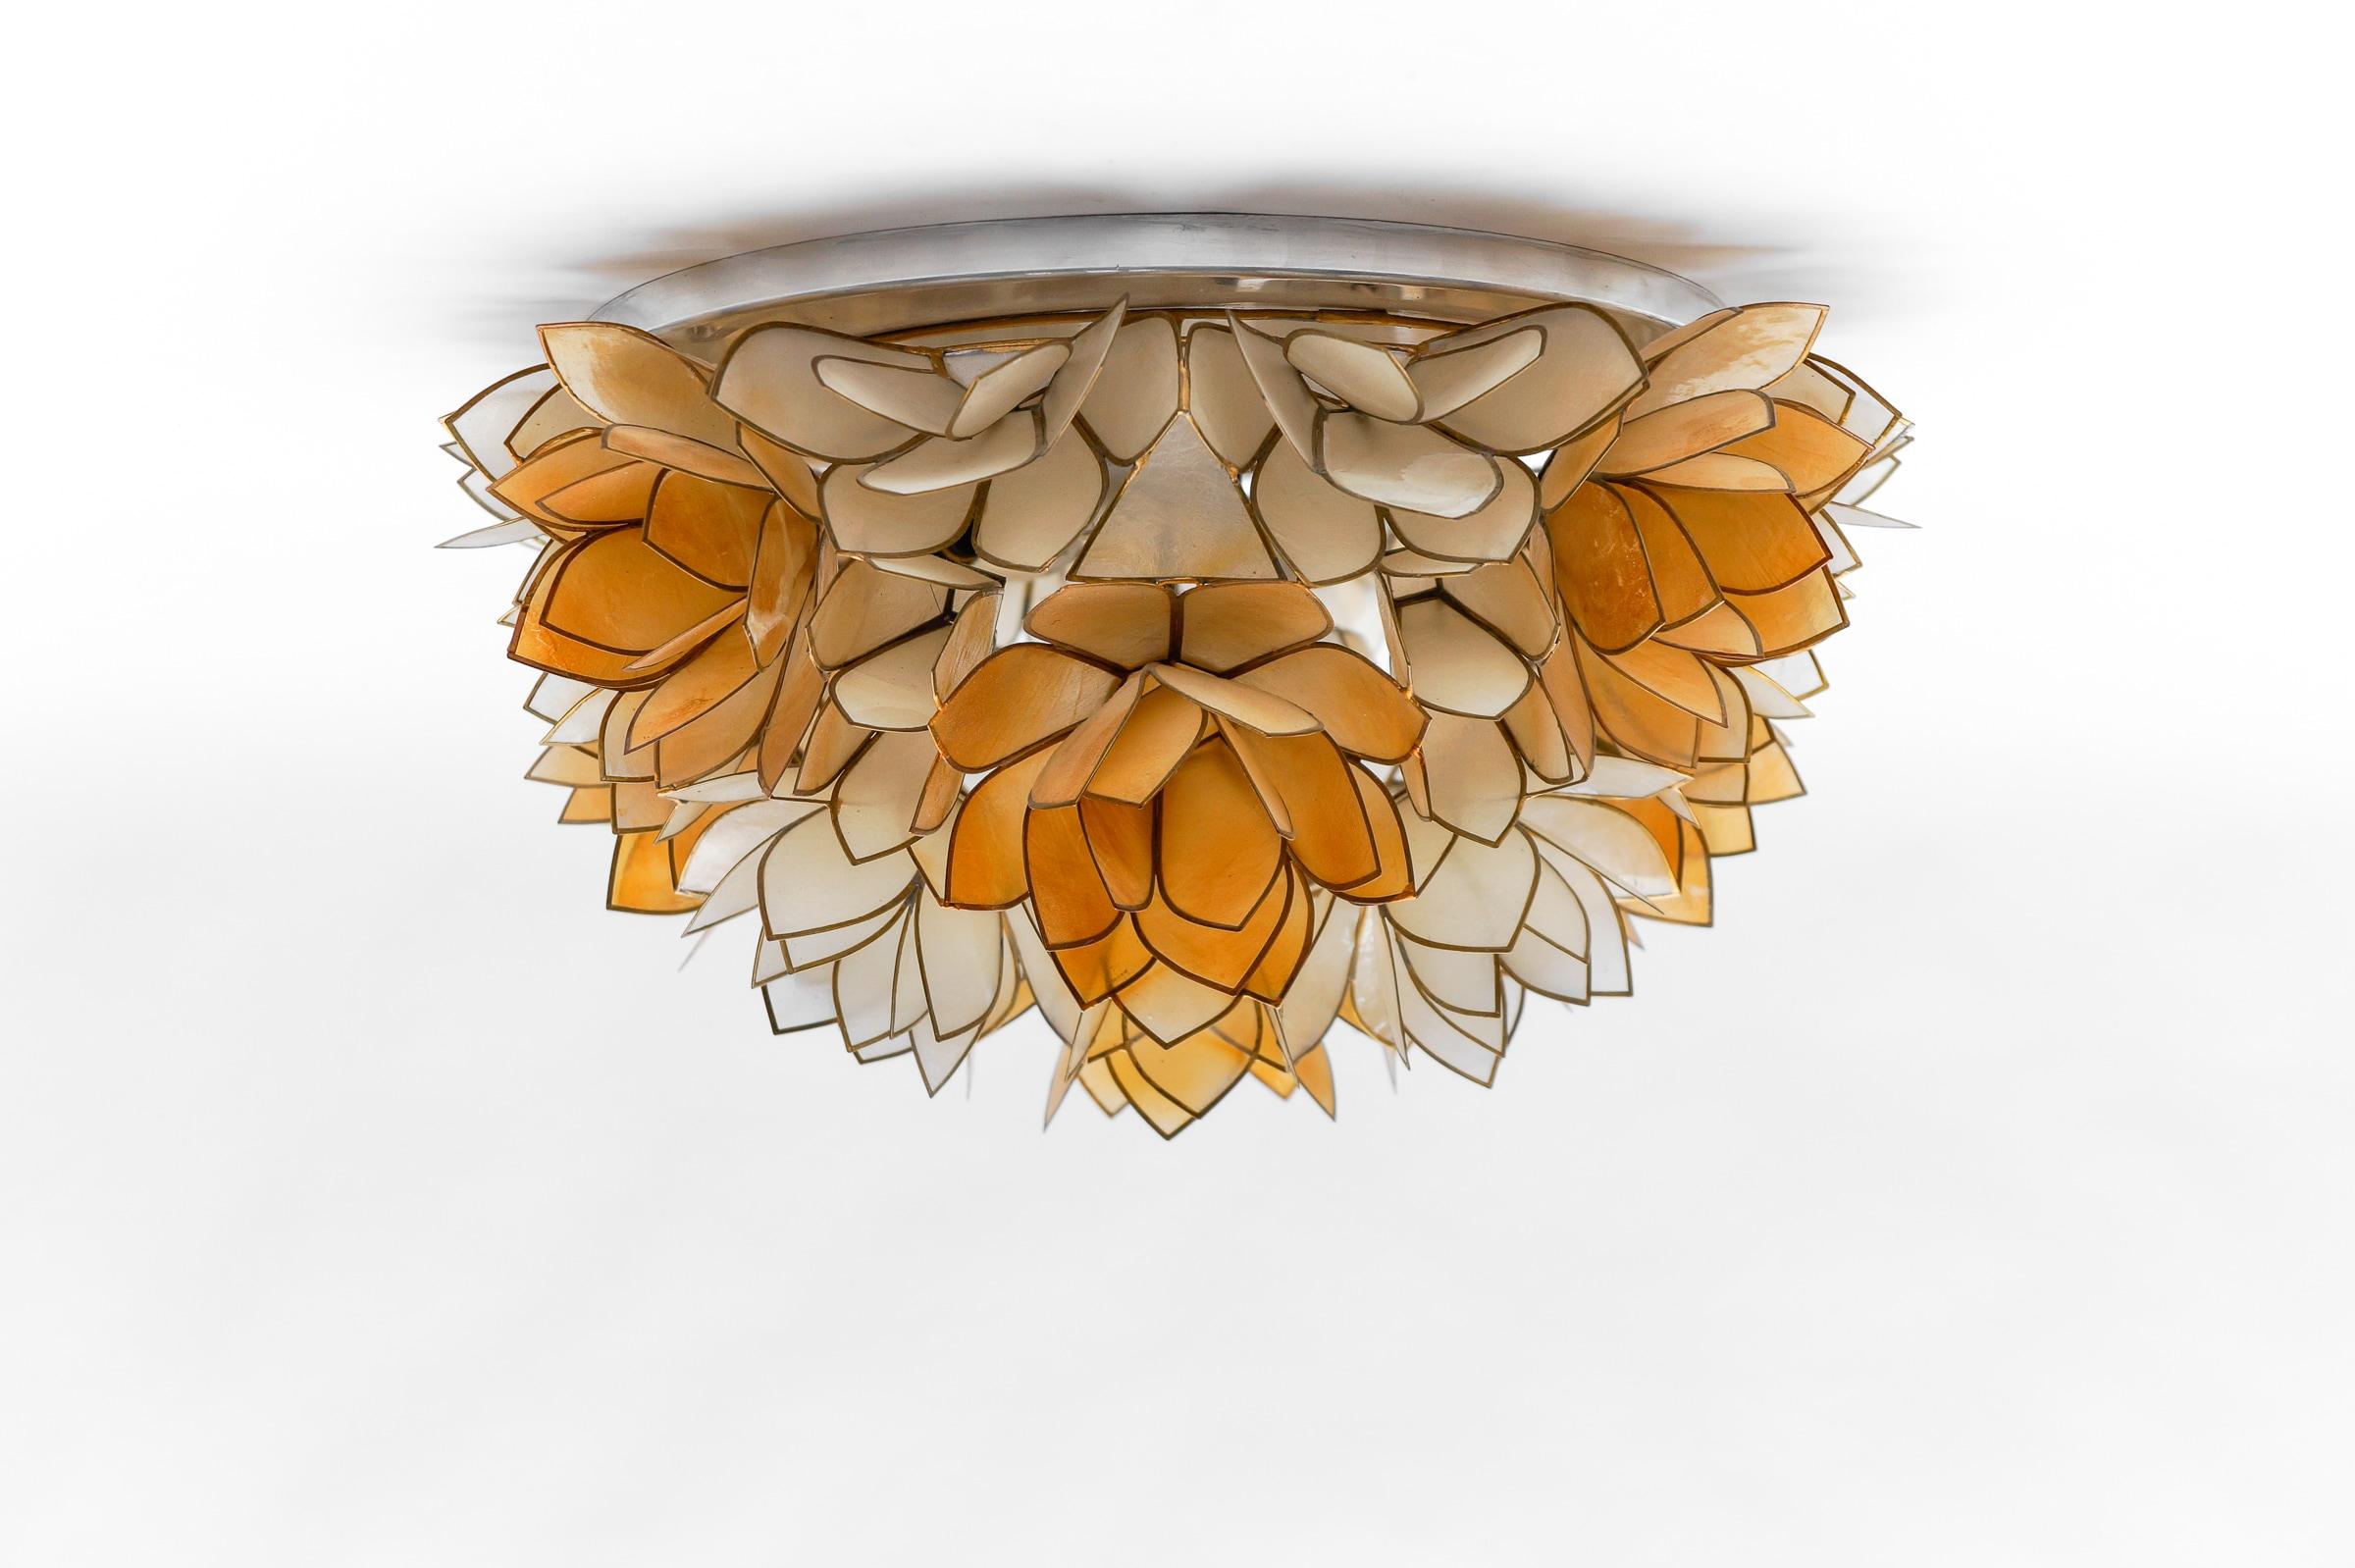 Flower Spherical Wall or Ceiling Lamps Made of Mother-of-Pearl in Orange, 1960s For Sale 10